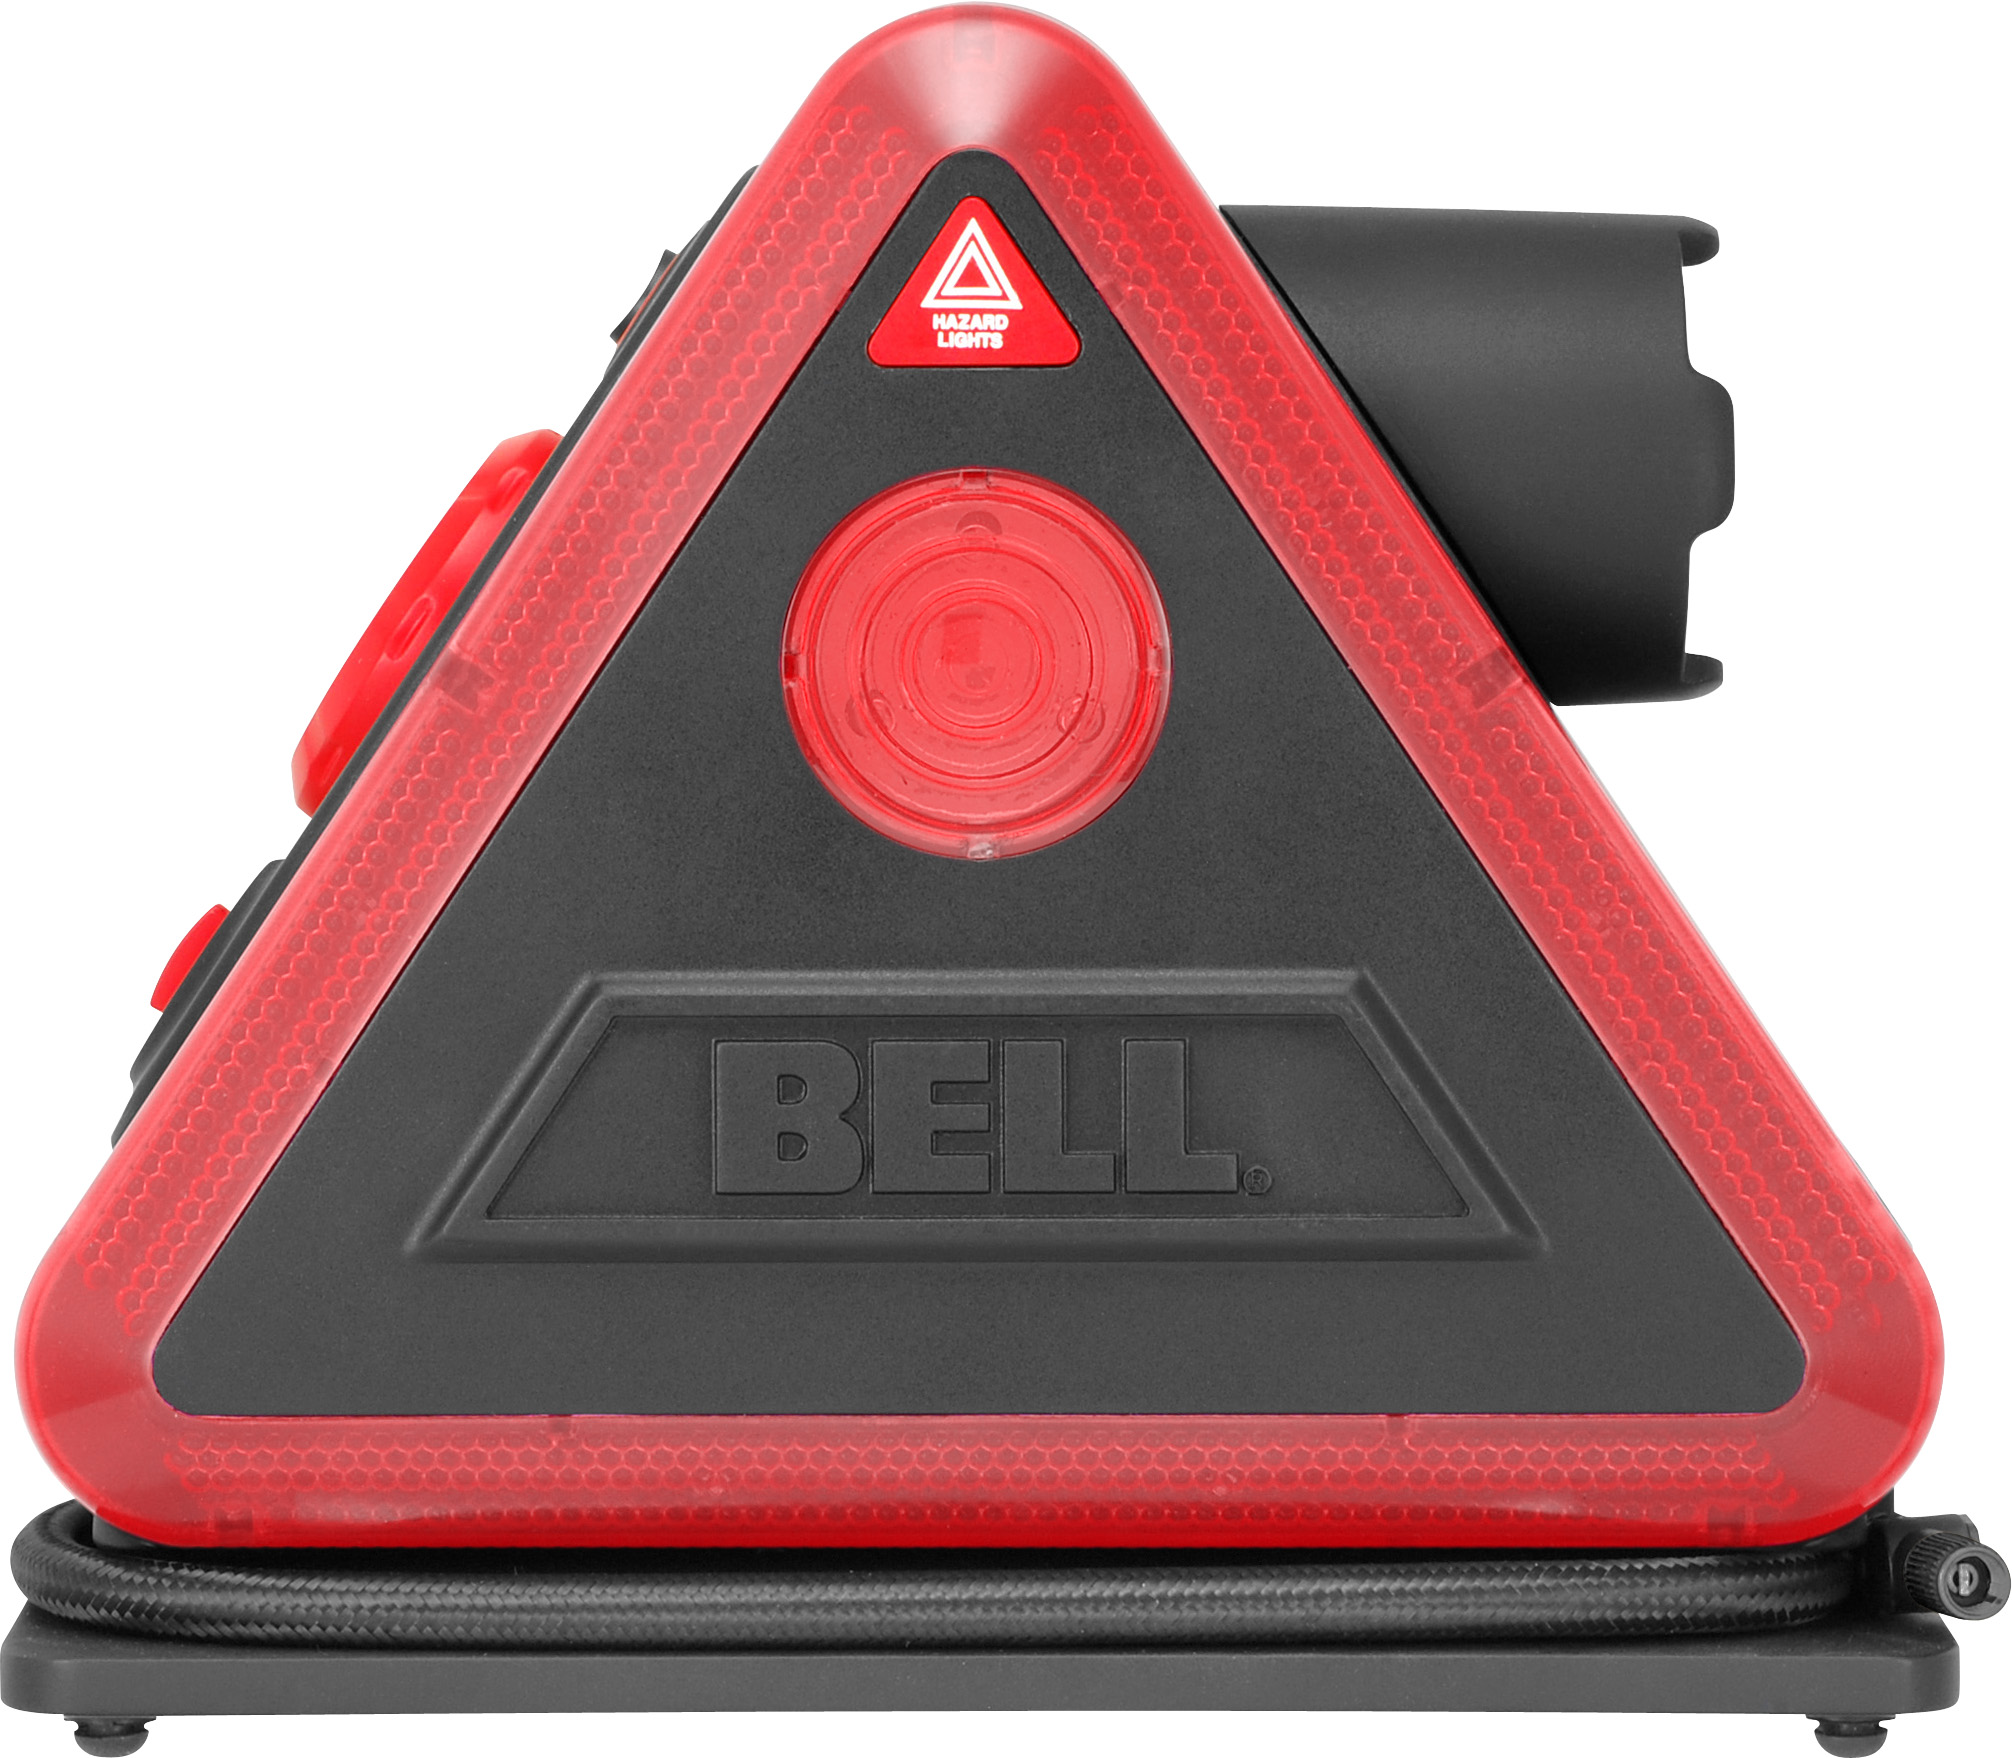 Bell 4000 Tire Inflator,10 Ft Power Cord  22-1-34000-8 - image 5 of 11